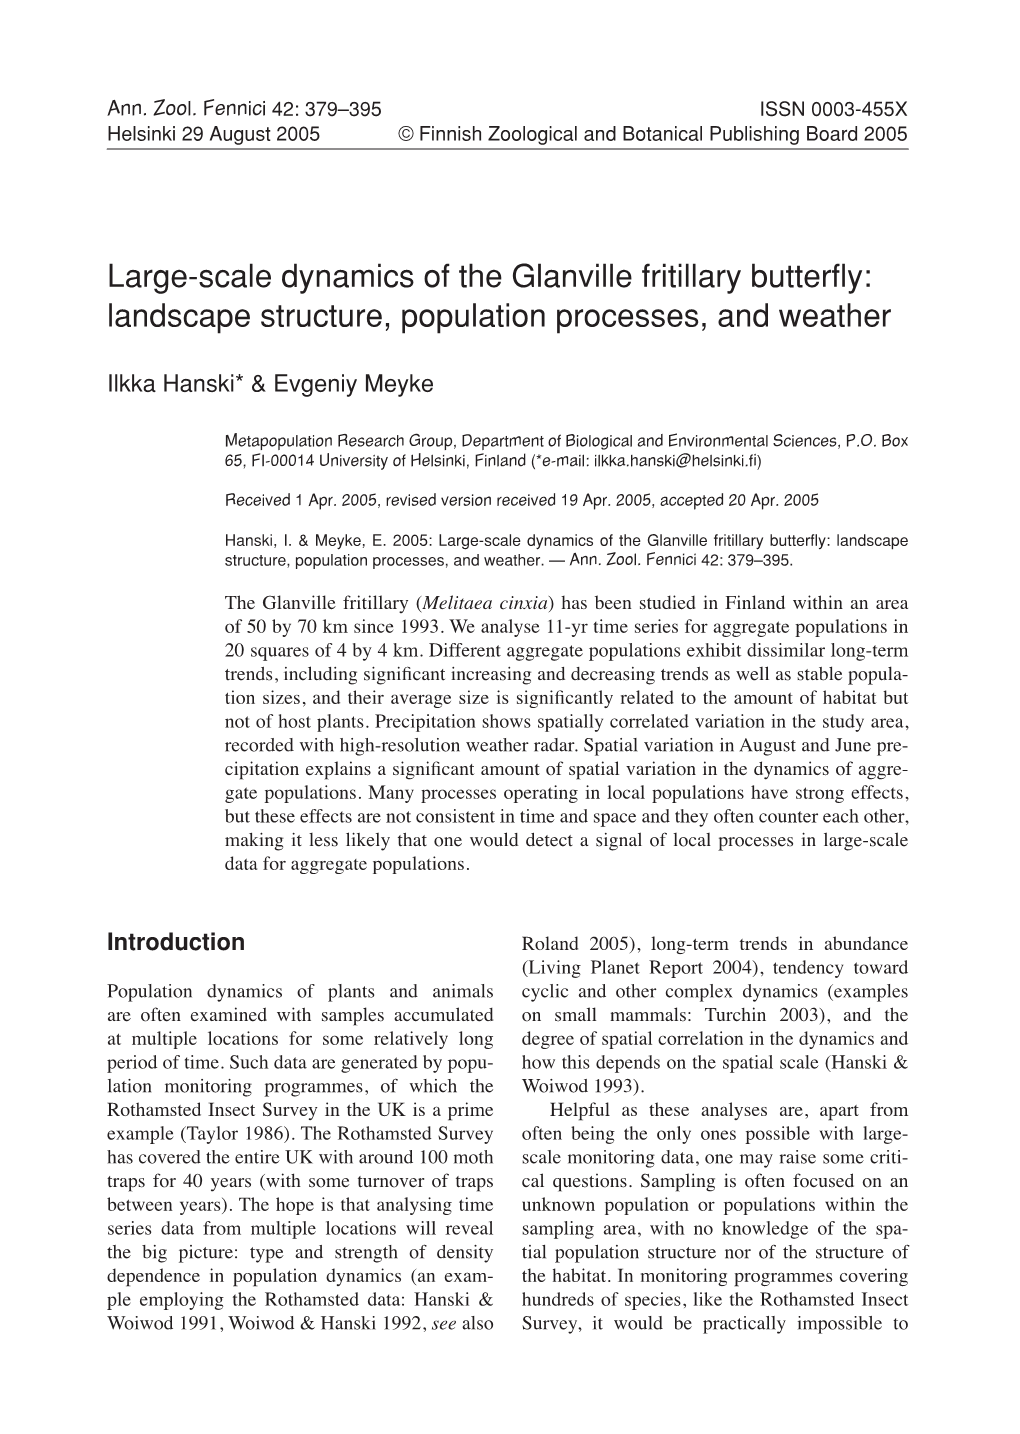 Large-Scale Dynamics of the Glanville Fritillary Butterfly